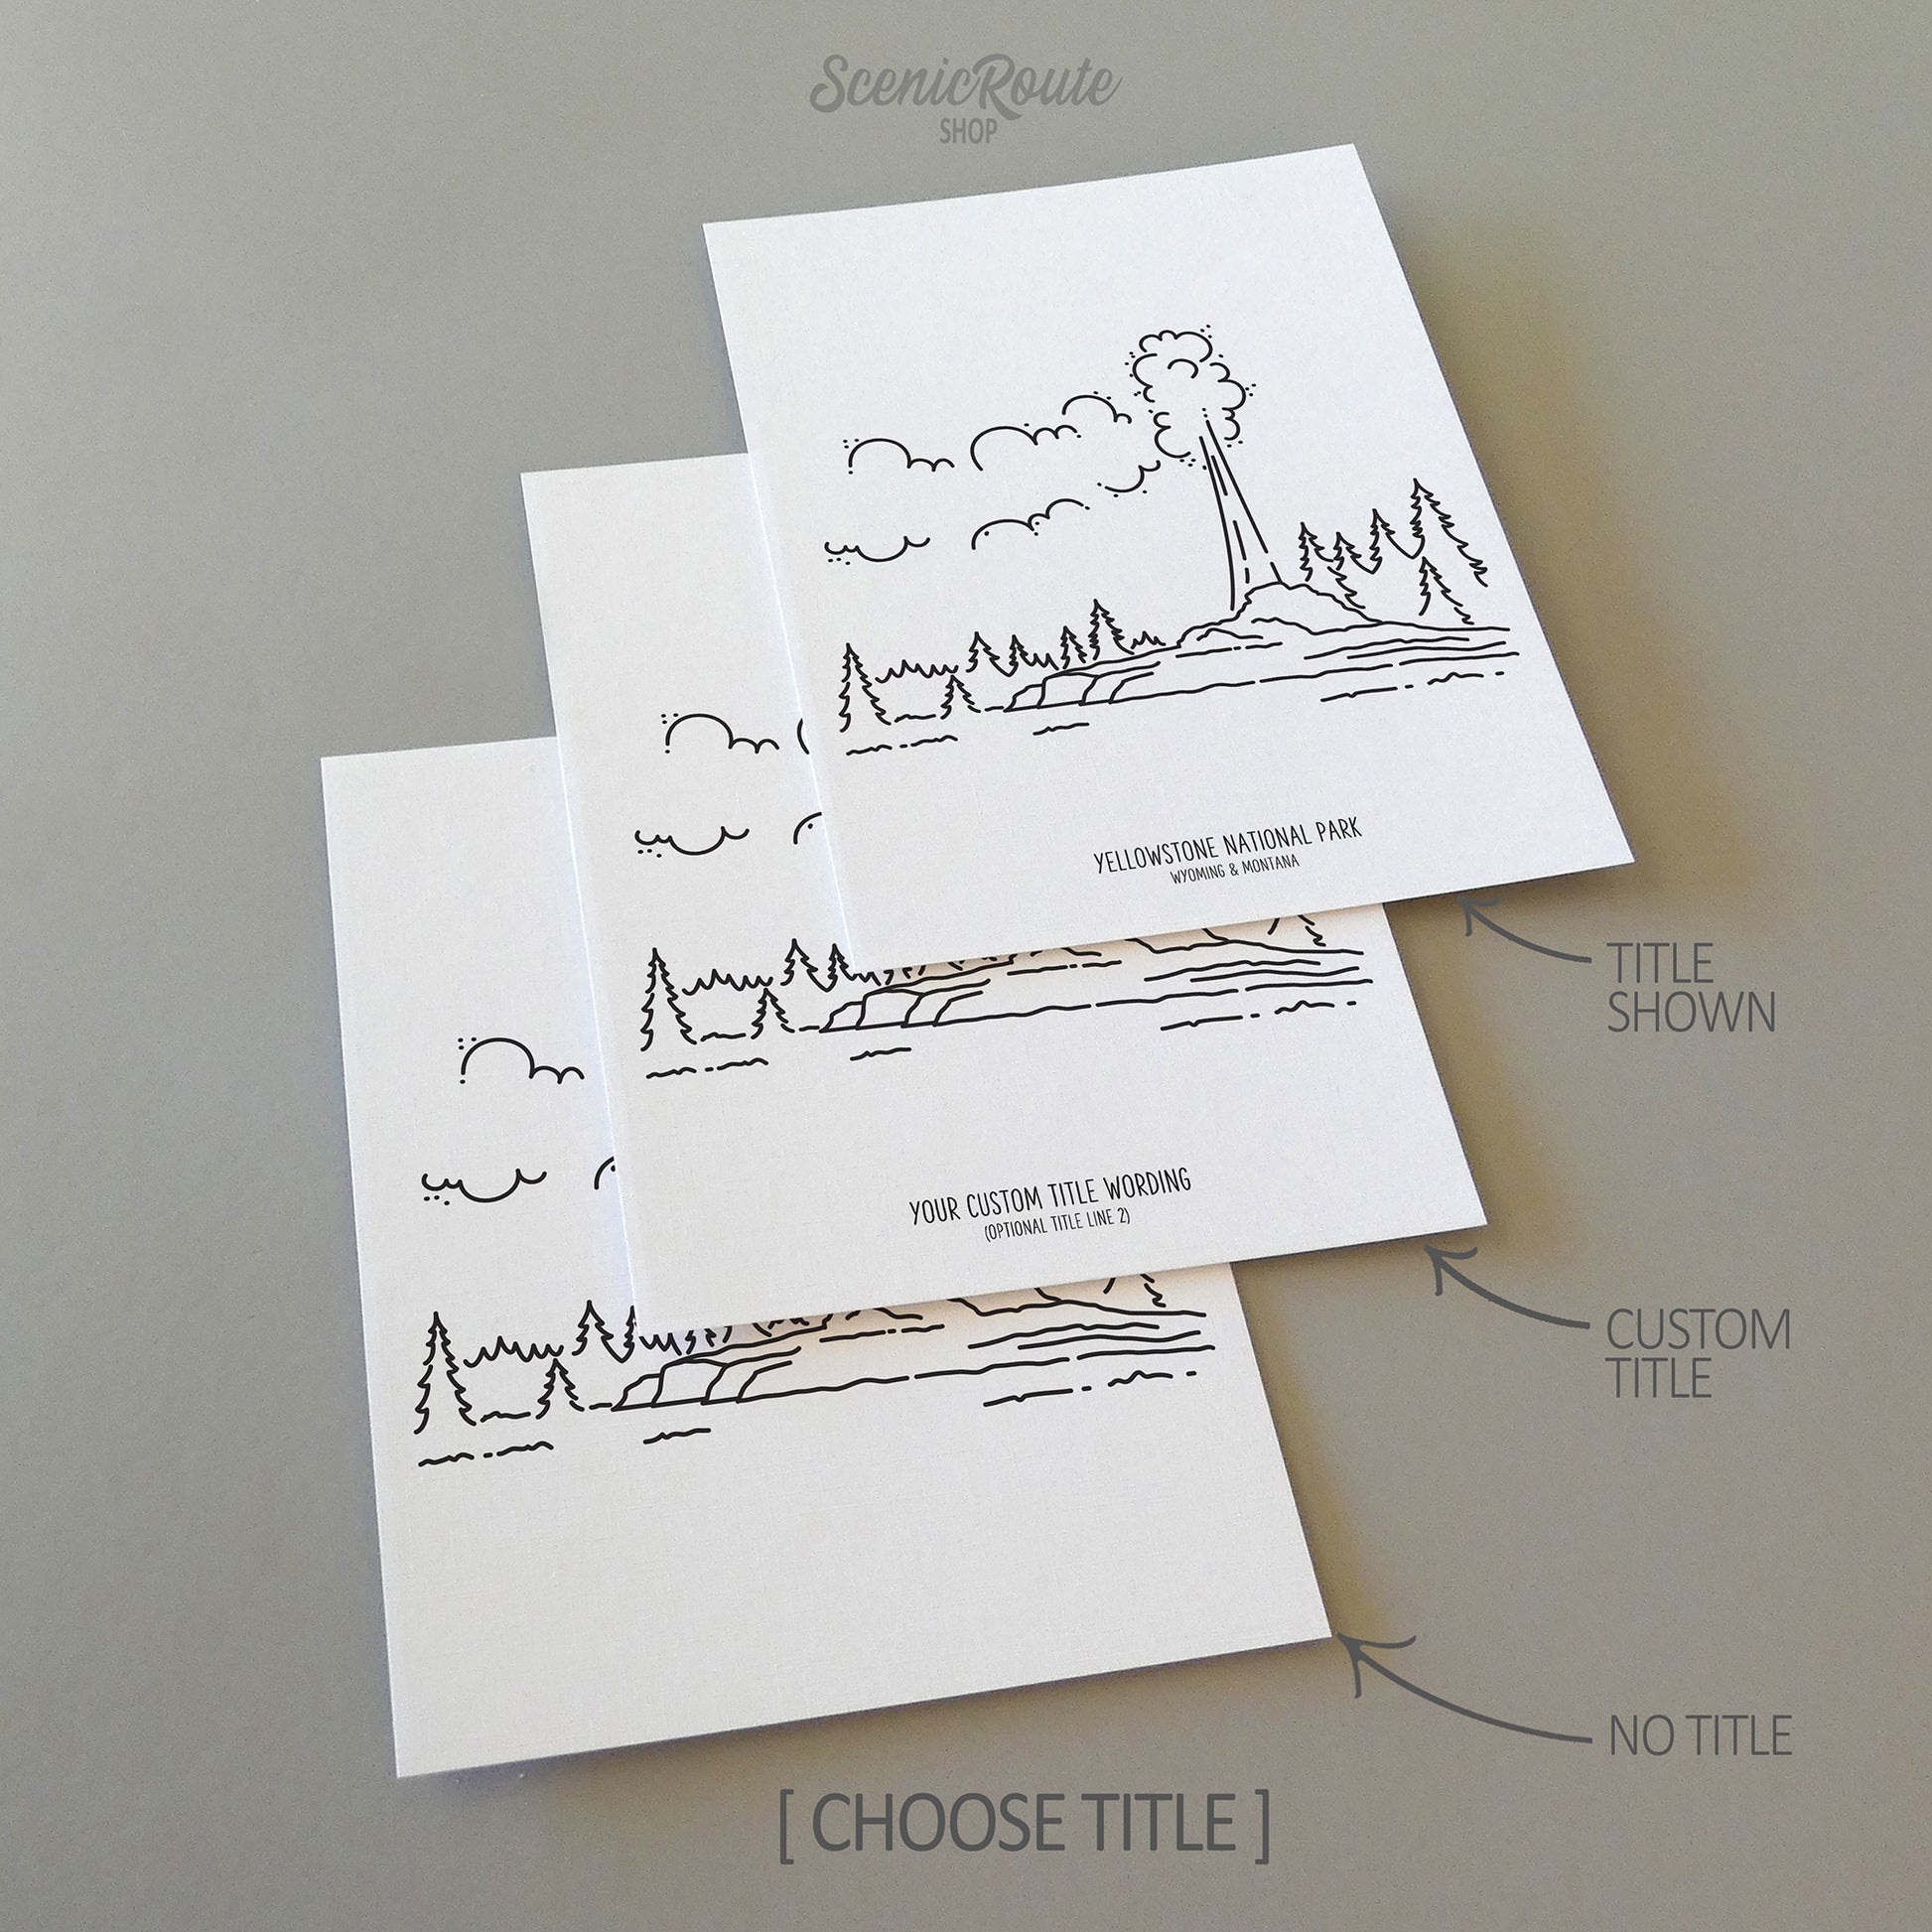 Three line art drawings of Yellowstone National Park on white linen paper with a gray background. The pieces are shown with title options that can be chosen and personalized.